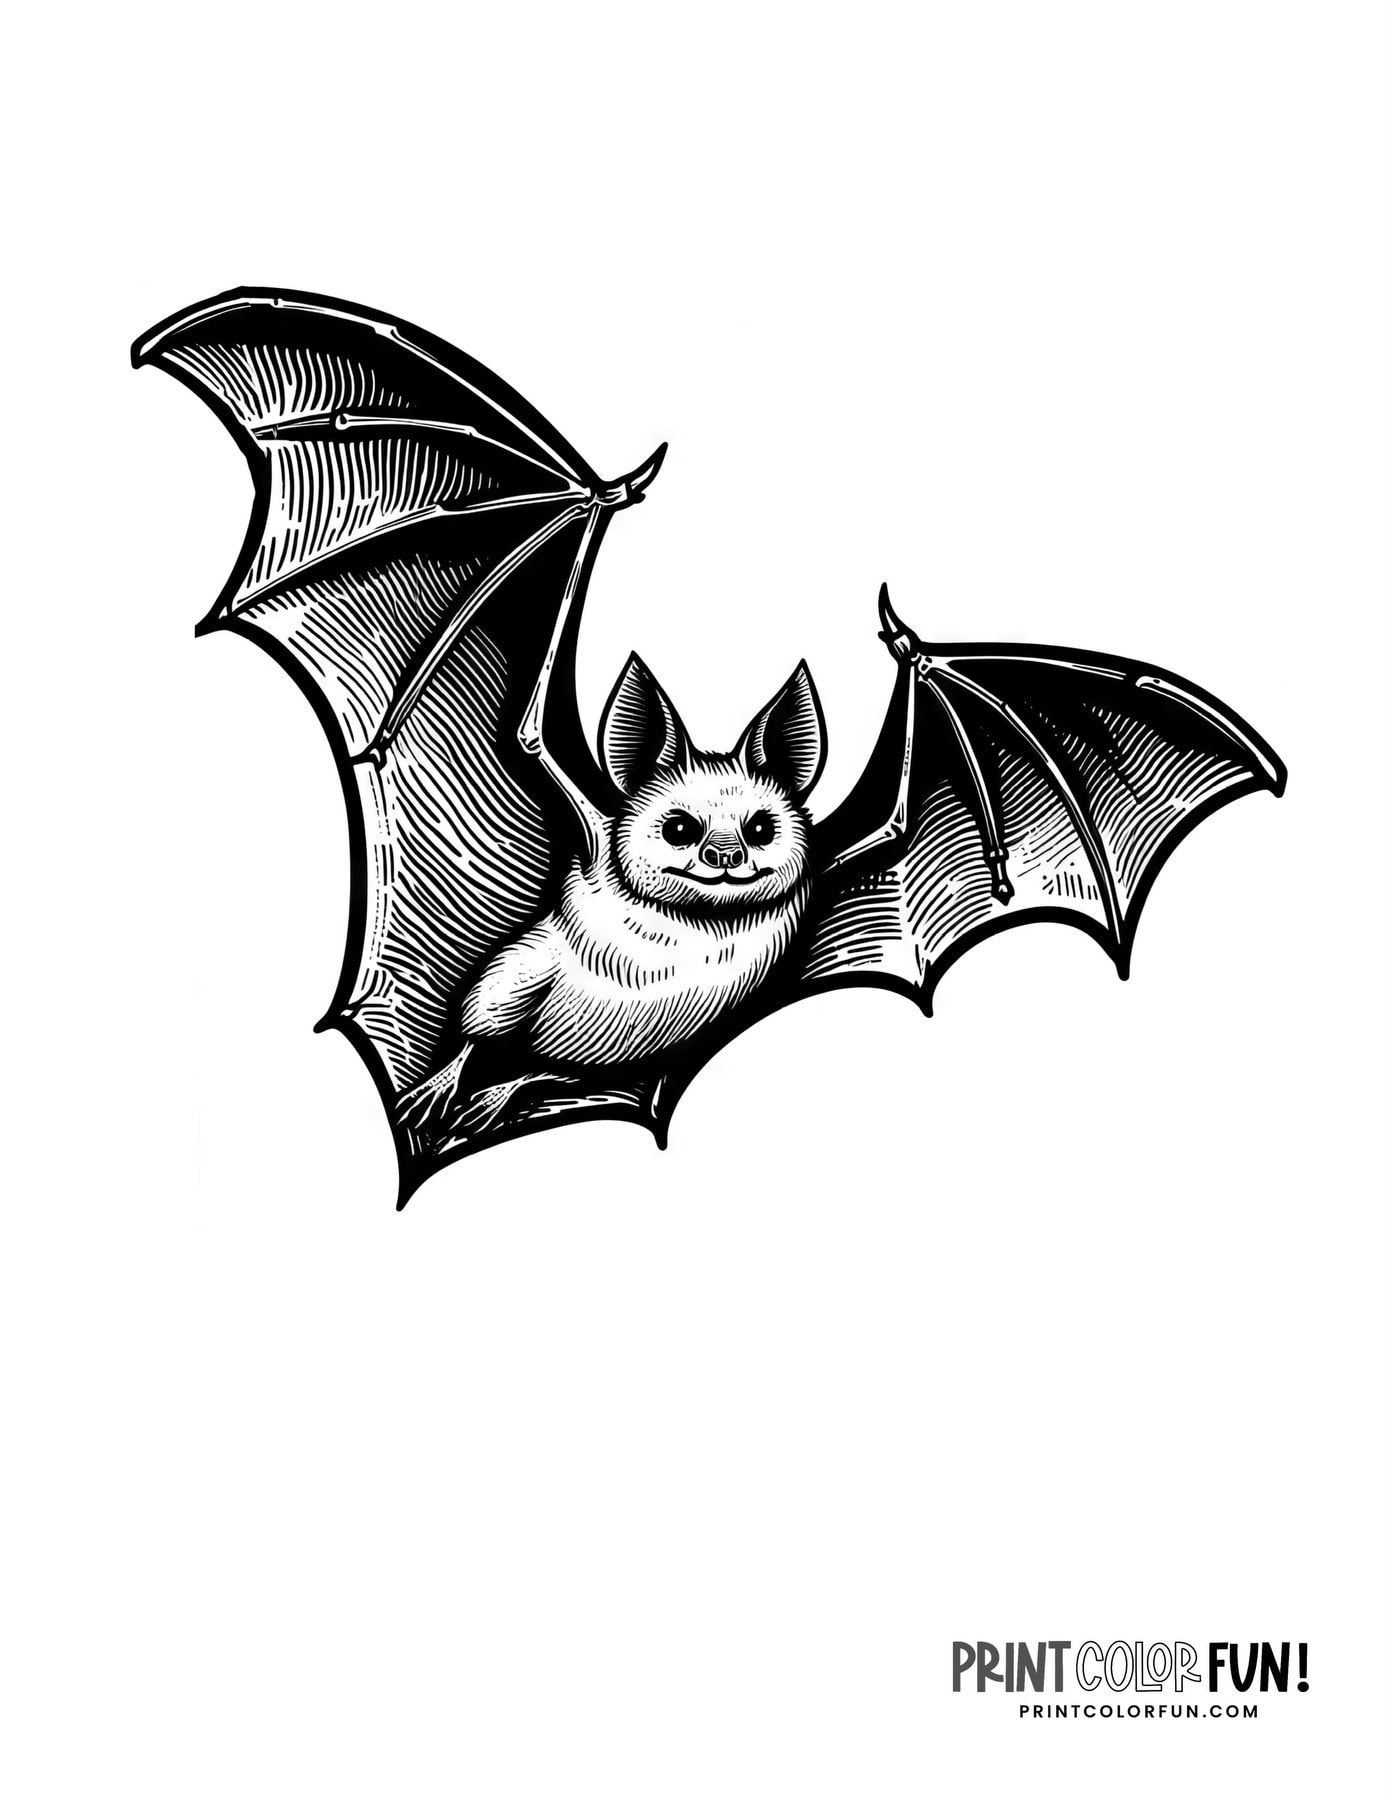 How To Draw A Realistic Bat - YouTube